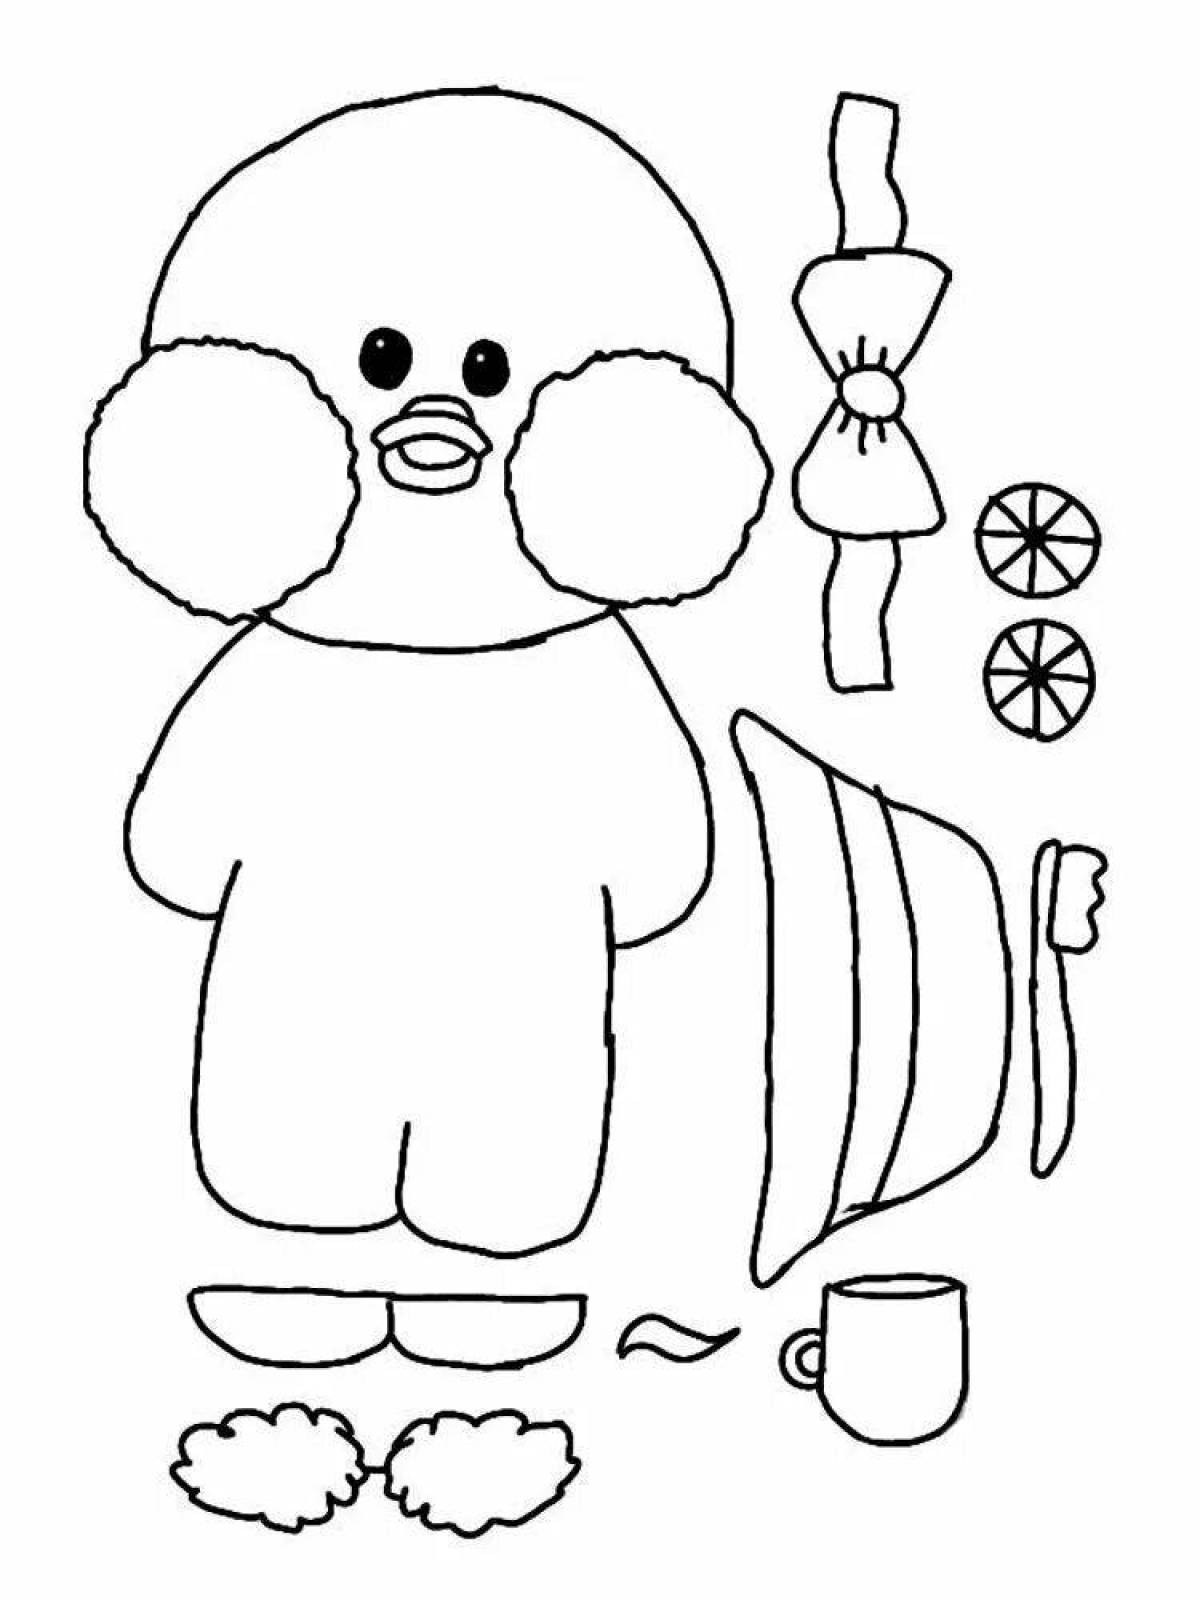 Coloring page stylish dressed duck